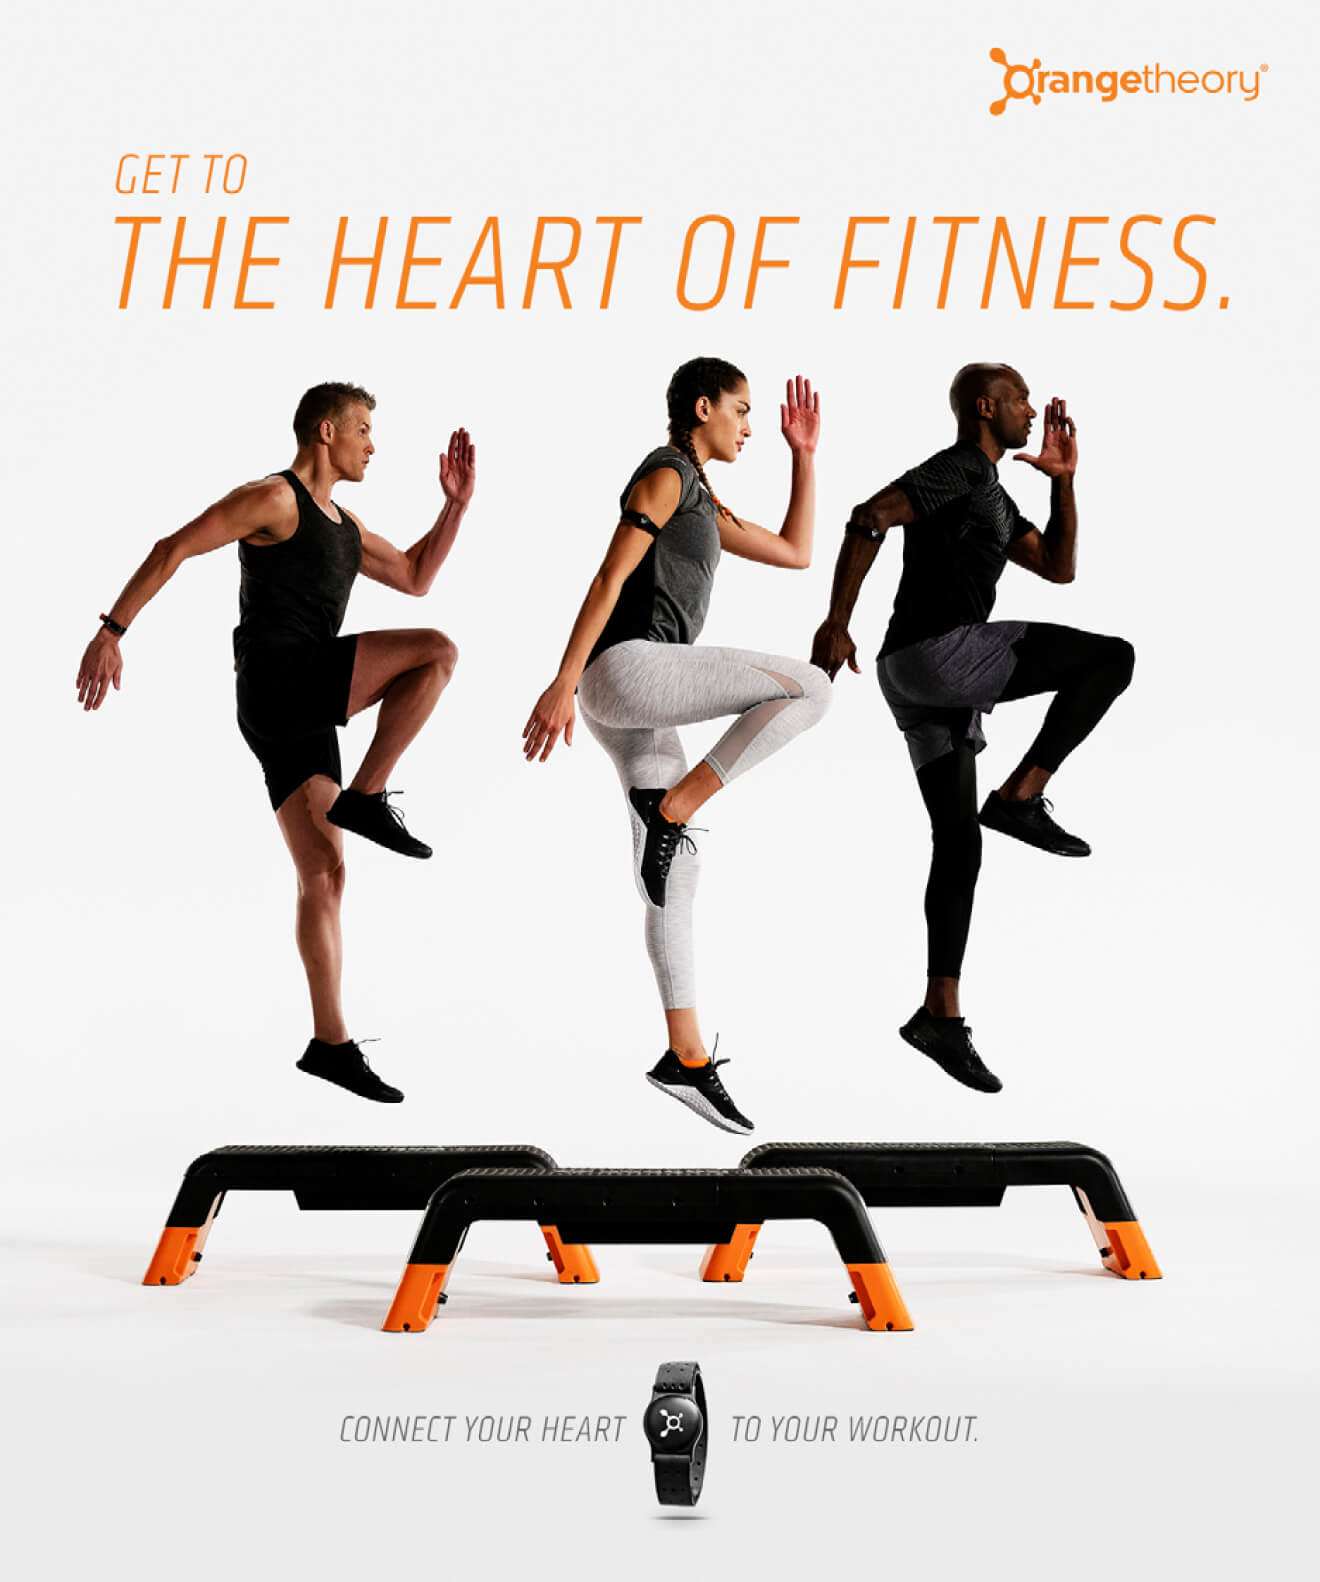 'Get to the heart of fitness' Orangetheory campaign